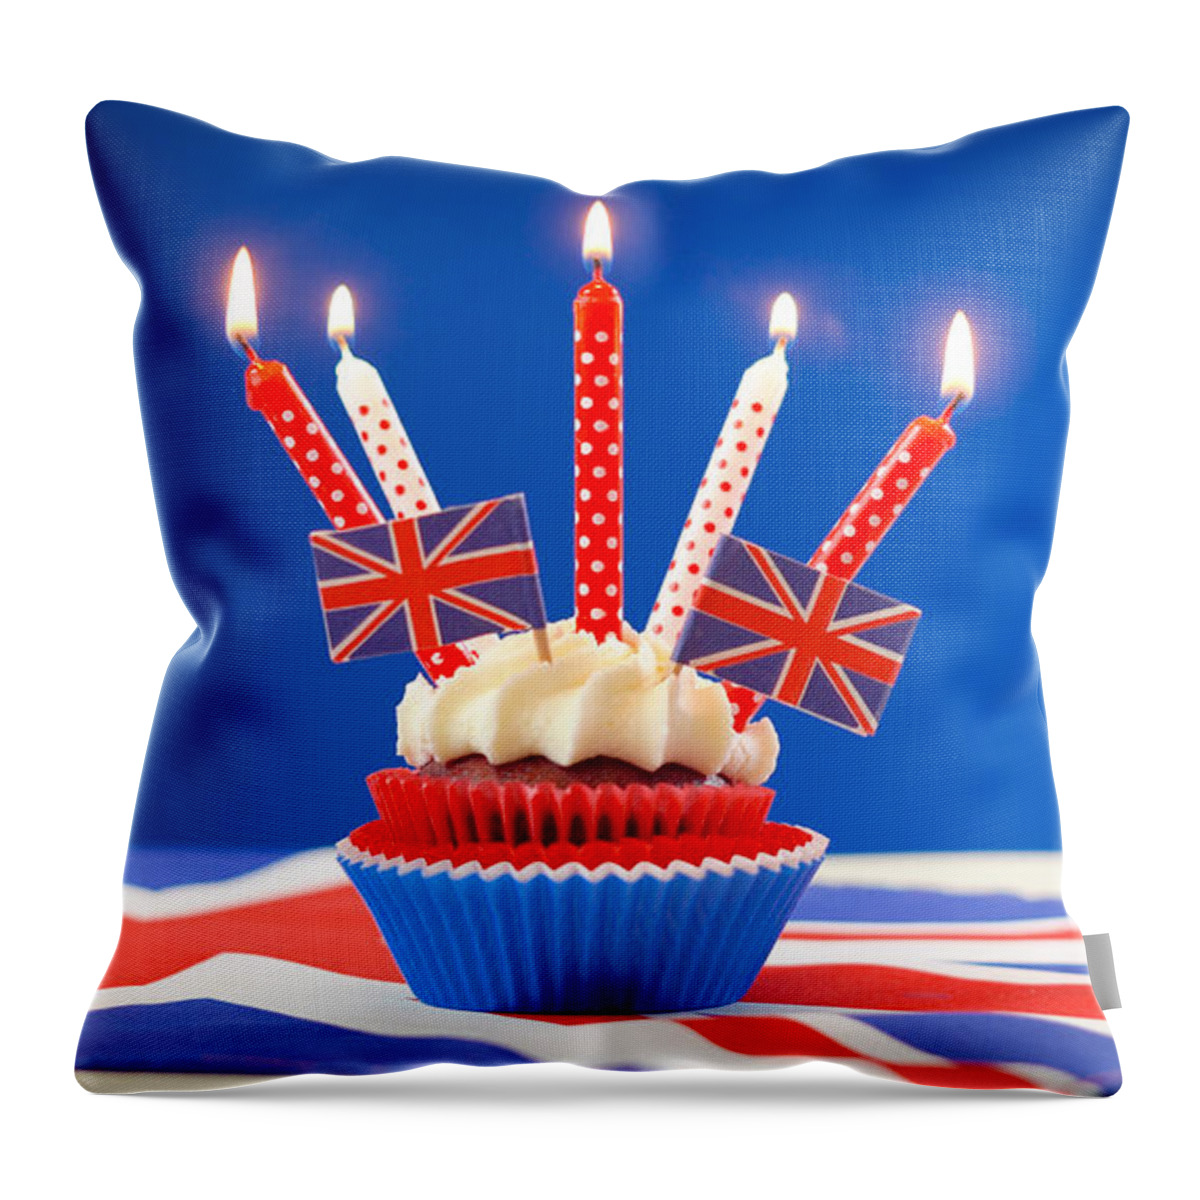 British Throw Pillow featuring the photograph Red white and blue theme cupcakes and cake stand with UK Union Jack flags #3 by Milleflore Images